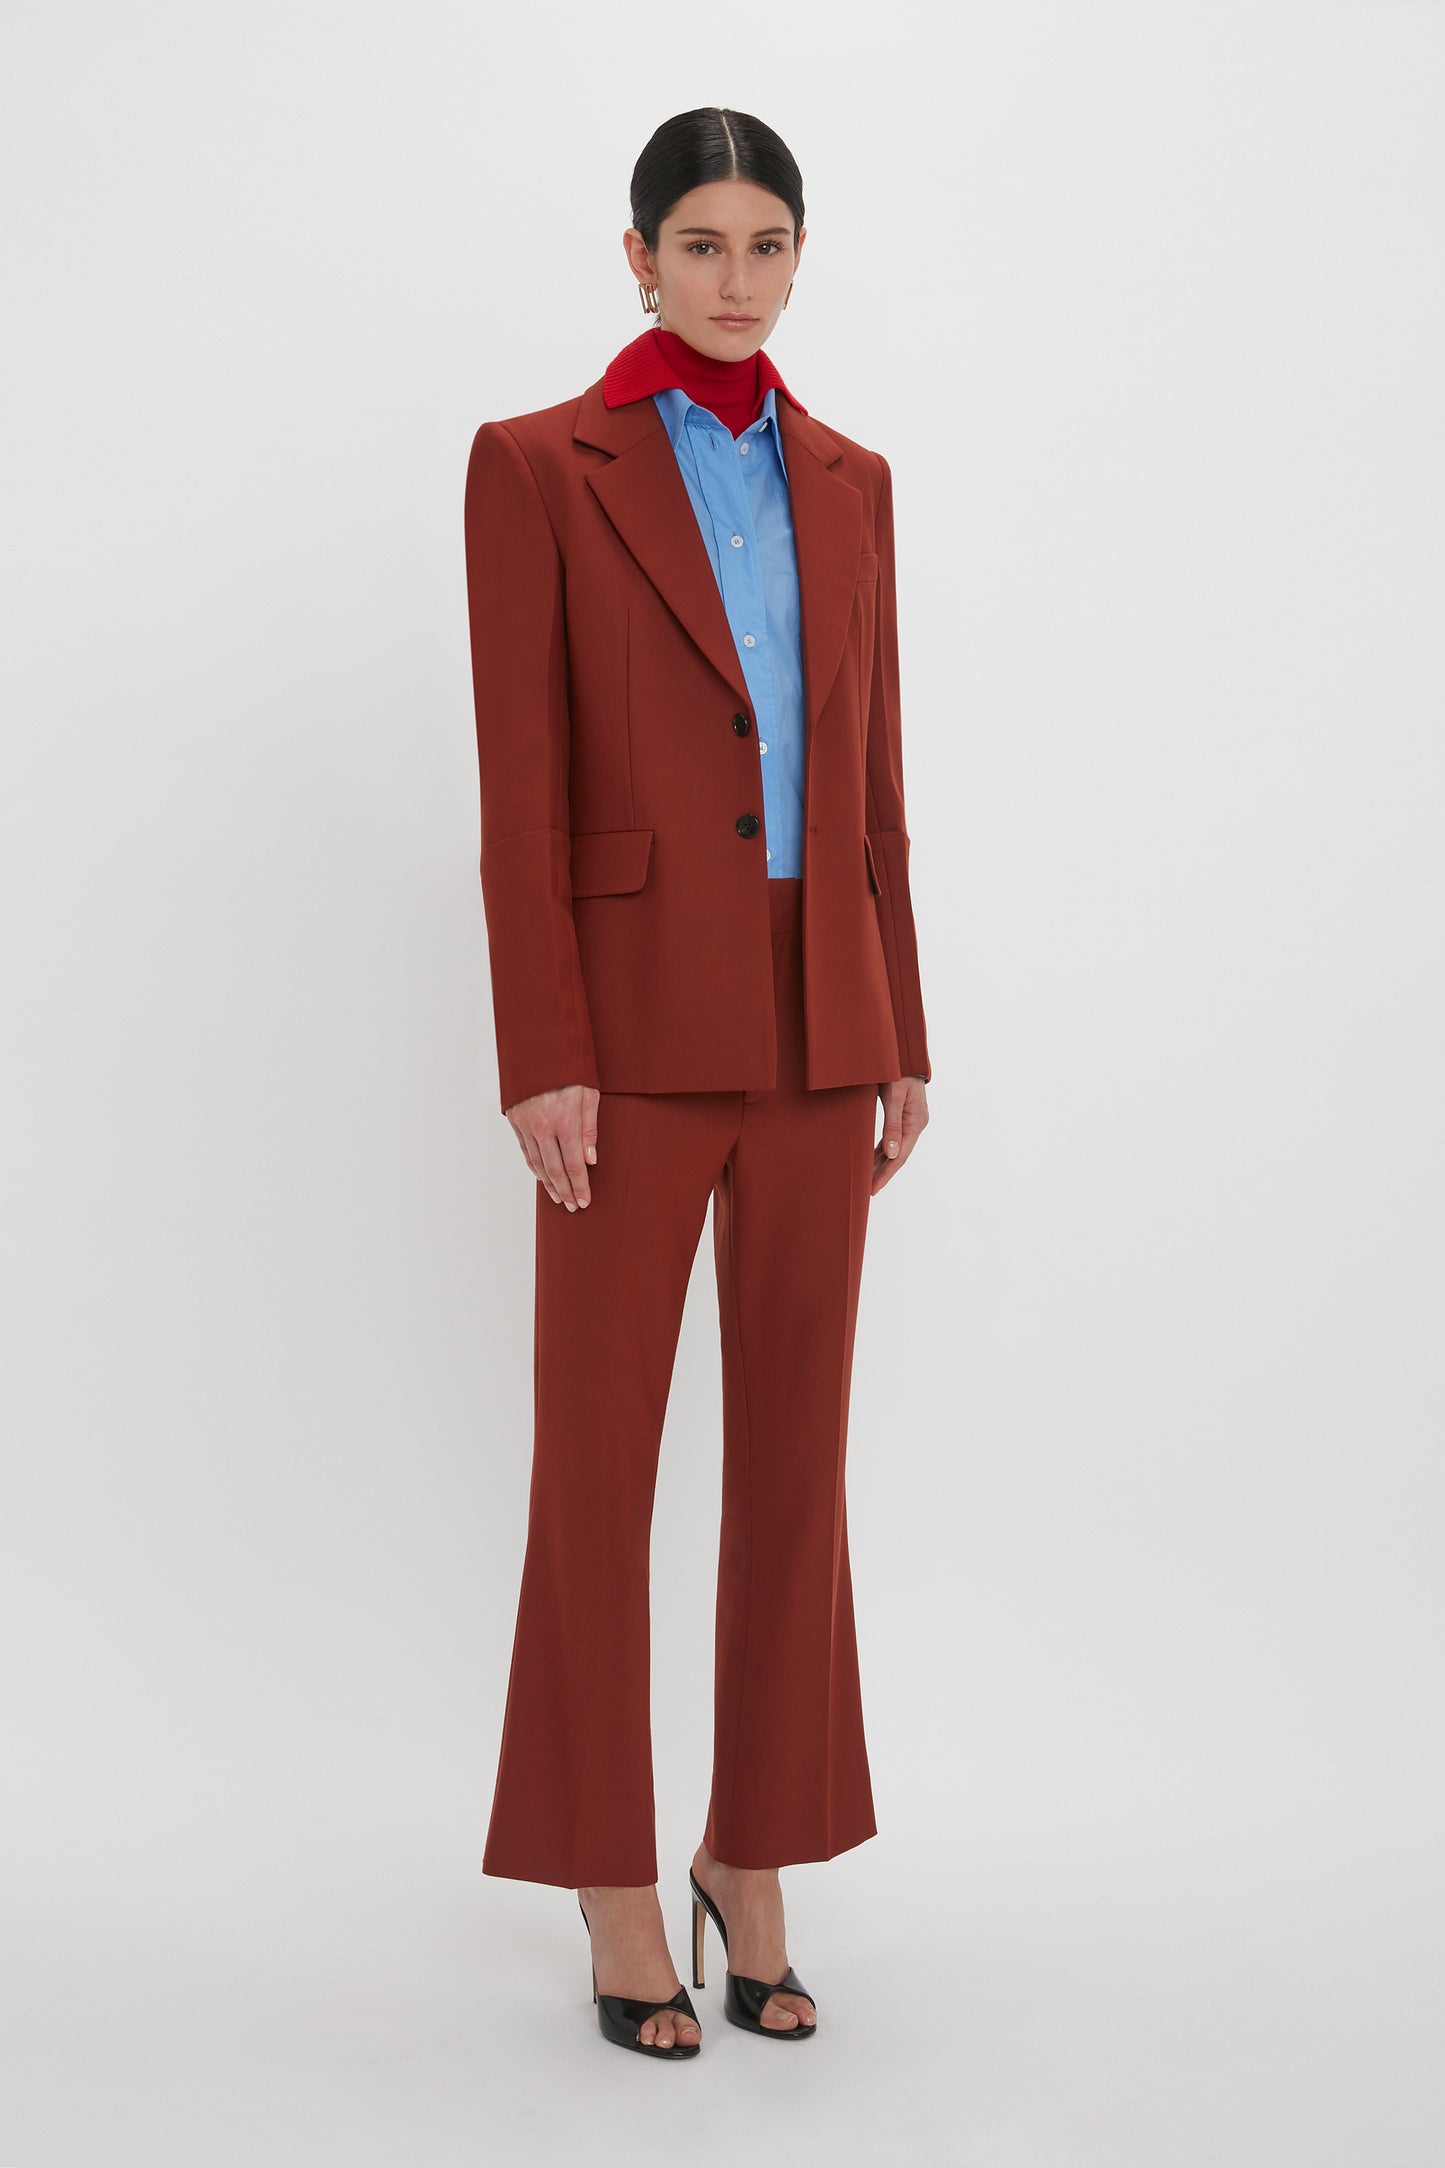 A person stands against a plain background wearing a rust-colored recycled wool suit, a blue shirt, red scarf, and black high-heeled shoes. The Victoria Beckham Sleeve Detail Patch Pocket Jacket In Russet features contemporary detailing, adding a modern touch to the classic ensemble.